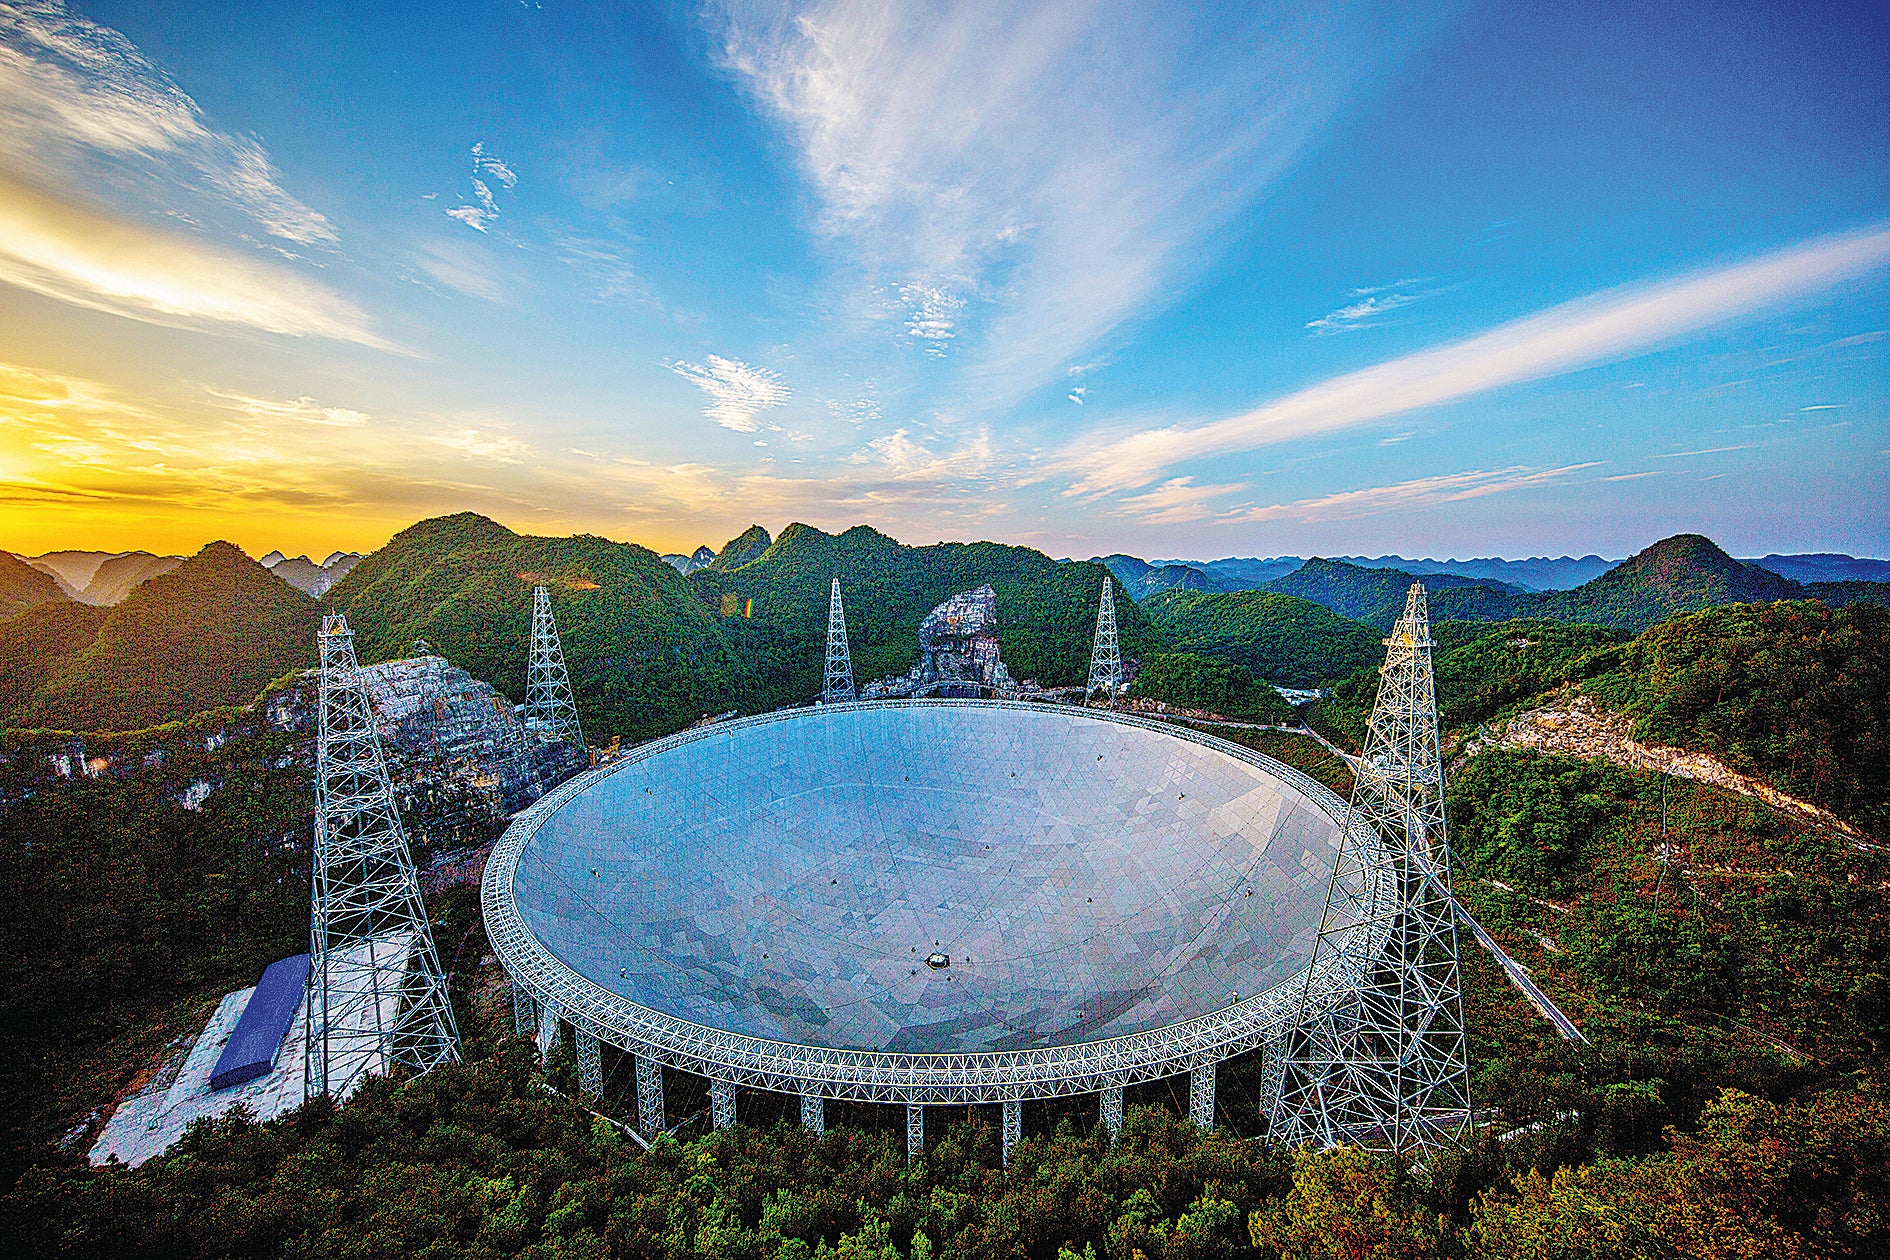 Located in a karst depression, the Five-hundred-meter Aperture Spherical Radio Telescope, or FAST, has helped scientists make important scientific research achievements